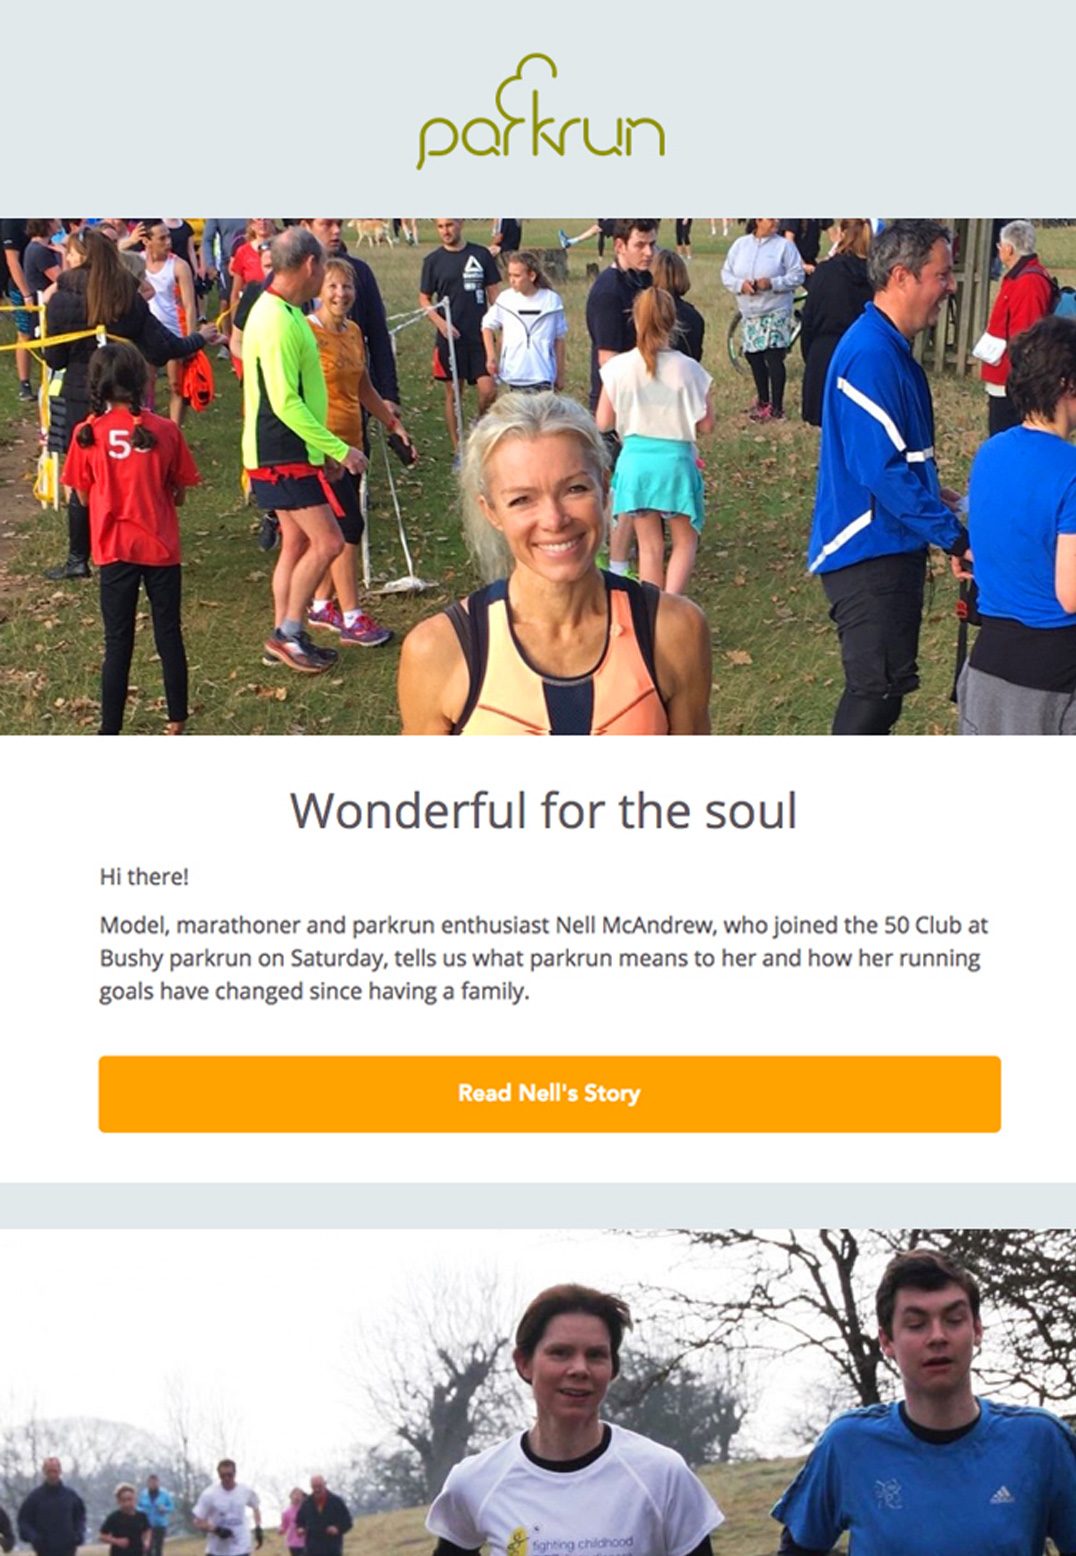 Parkrun - Nonprofit Email Marketing – Compelling Story